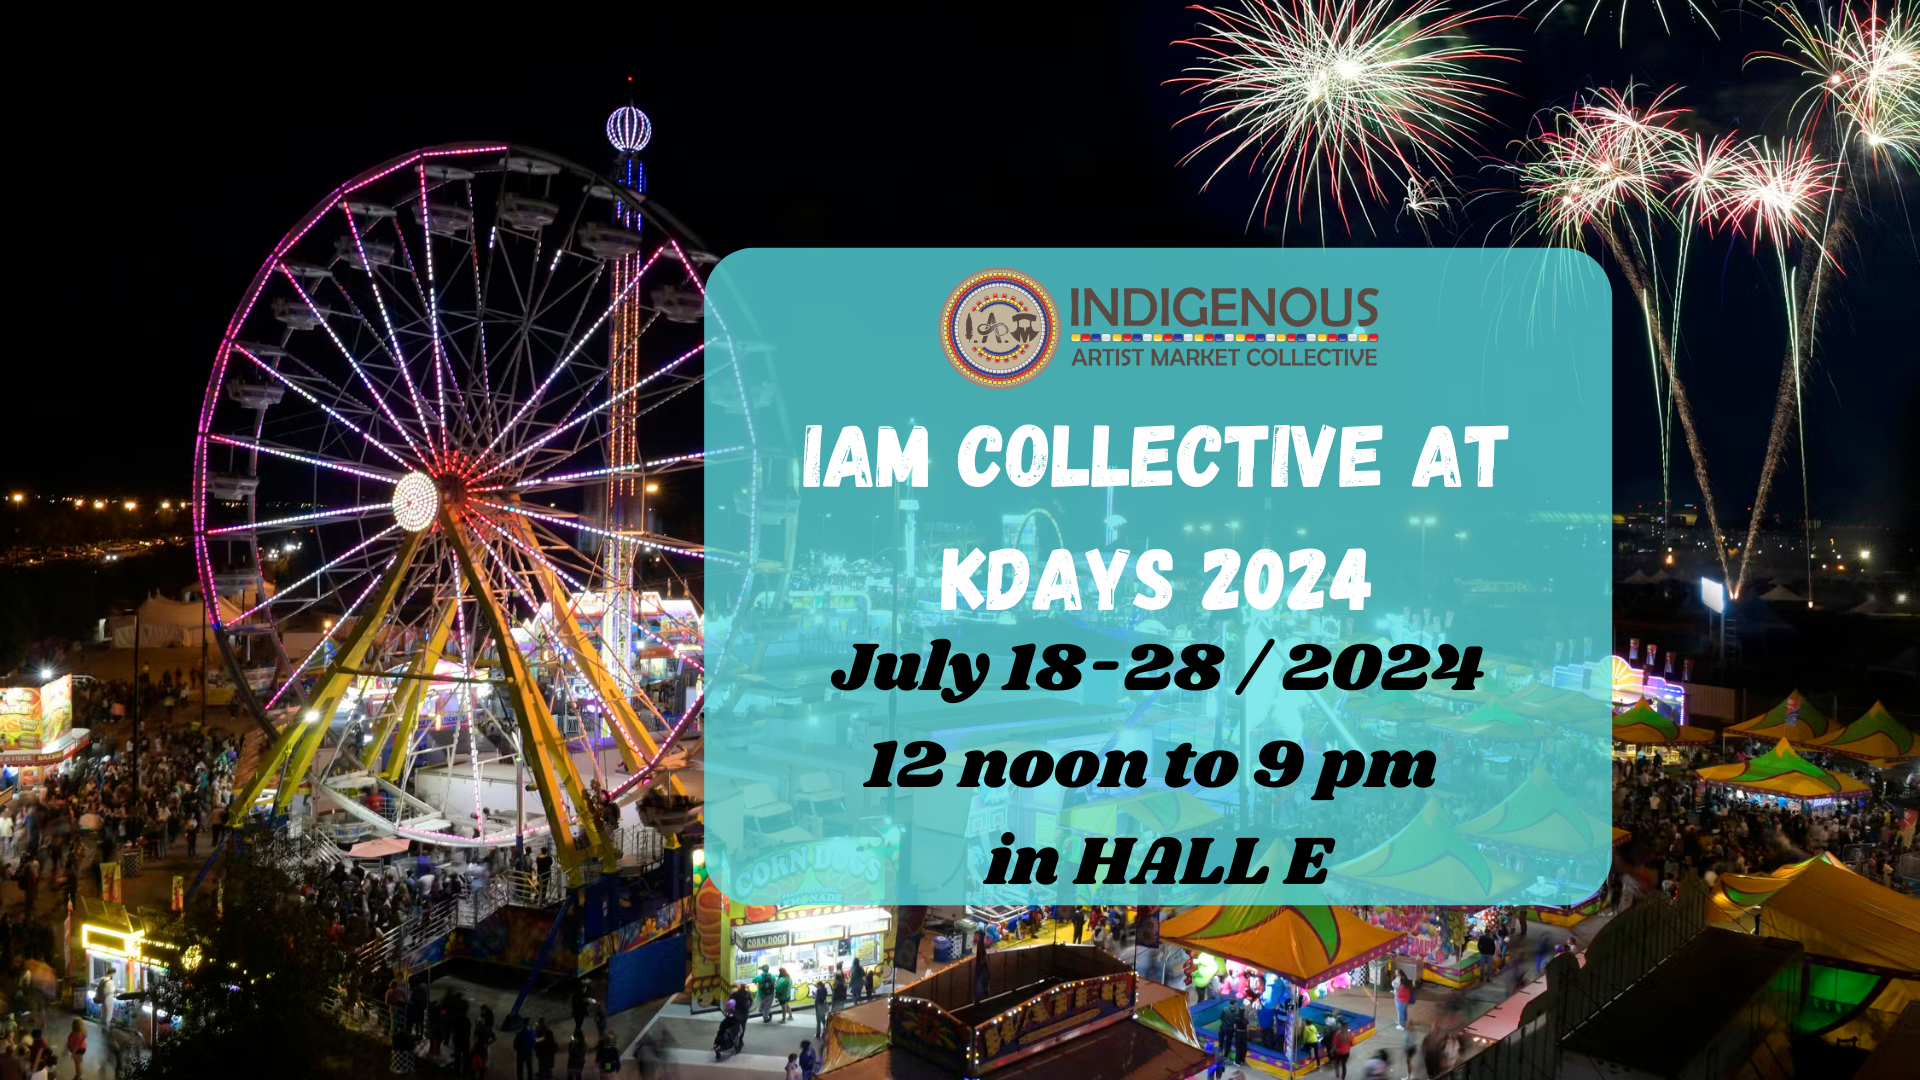 Featured image for “IAM Collective @ K DAYS 2024 inside the Indigenous Experience in HALL E  JULY 19-28”